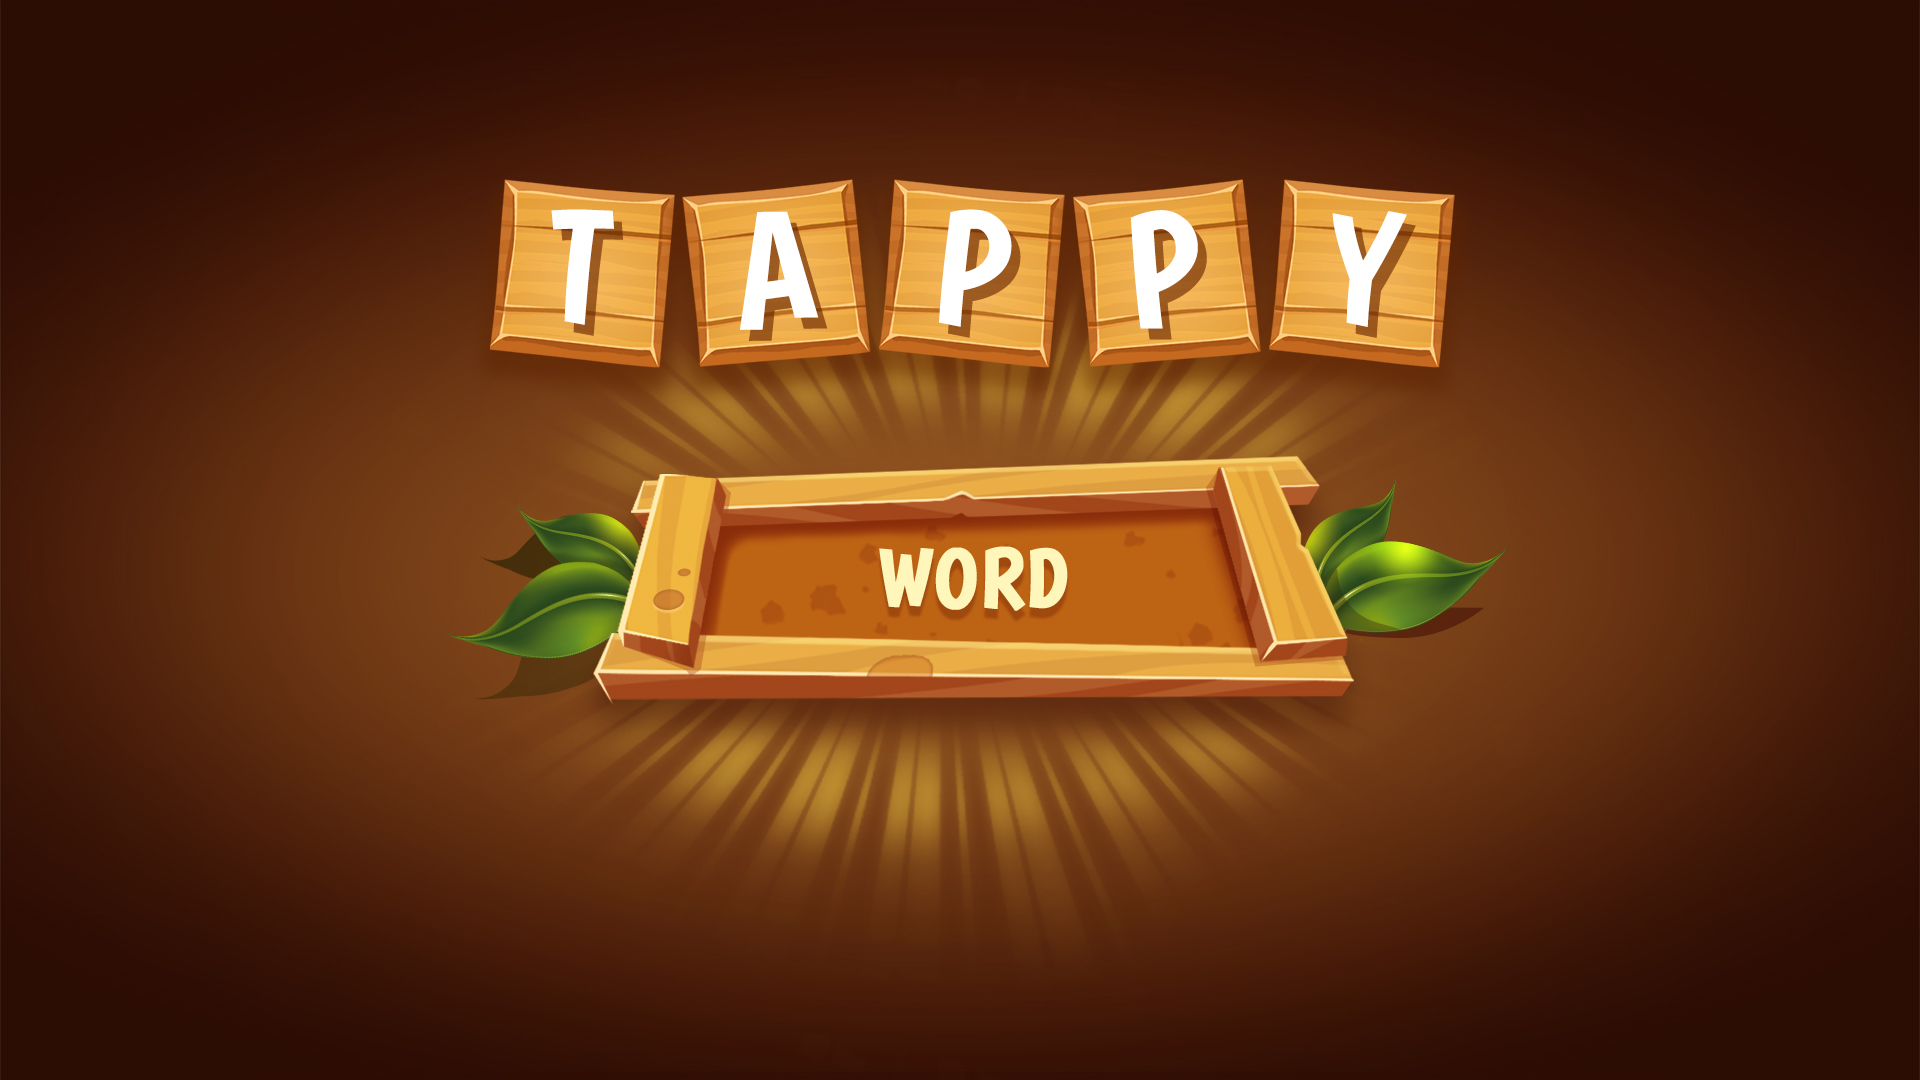 Tappy Word